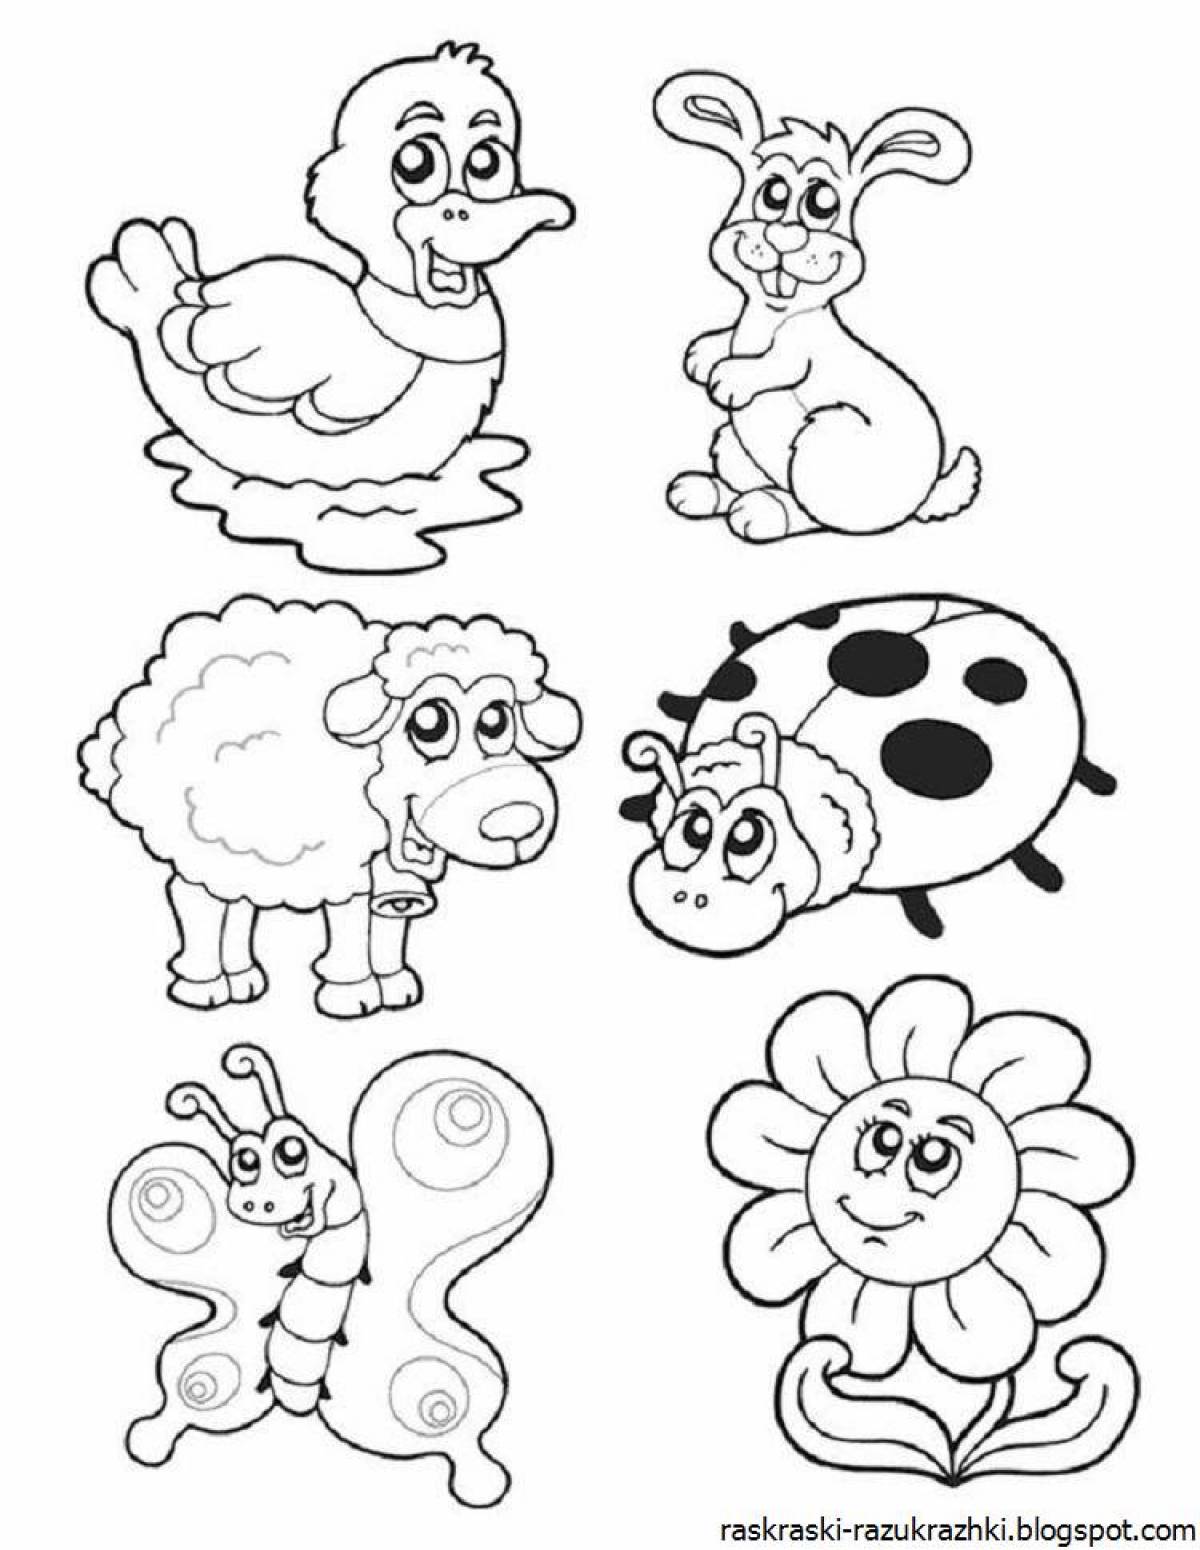 Exciting animal coloring pages for kids